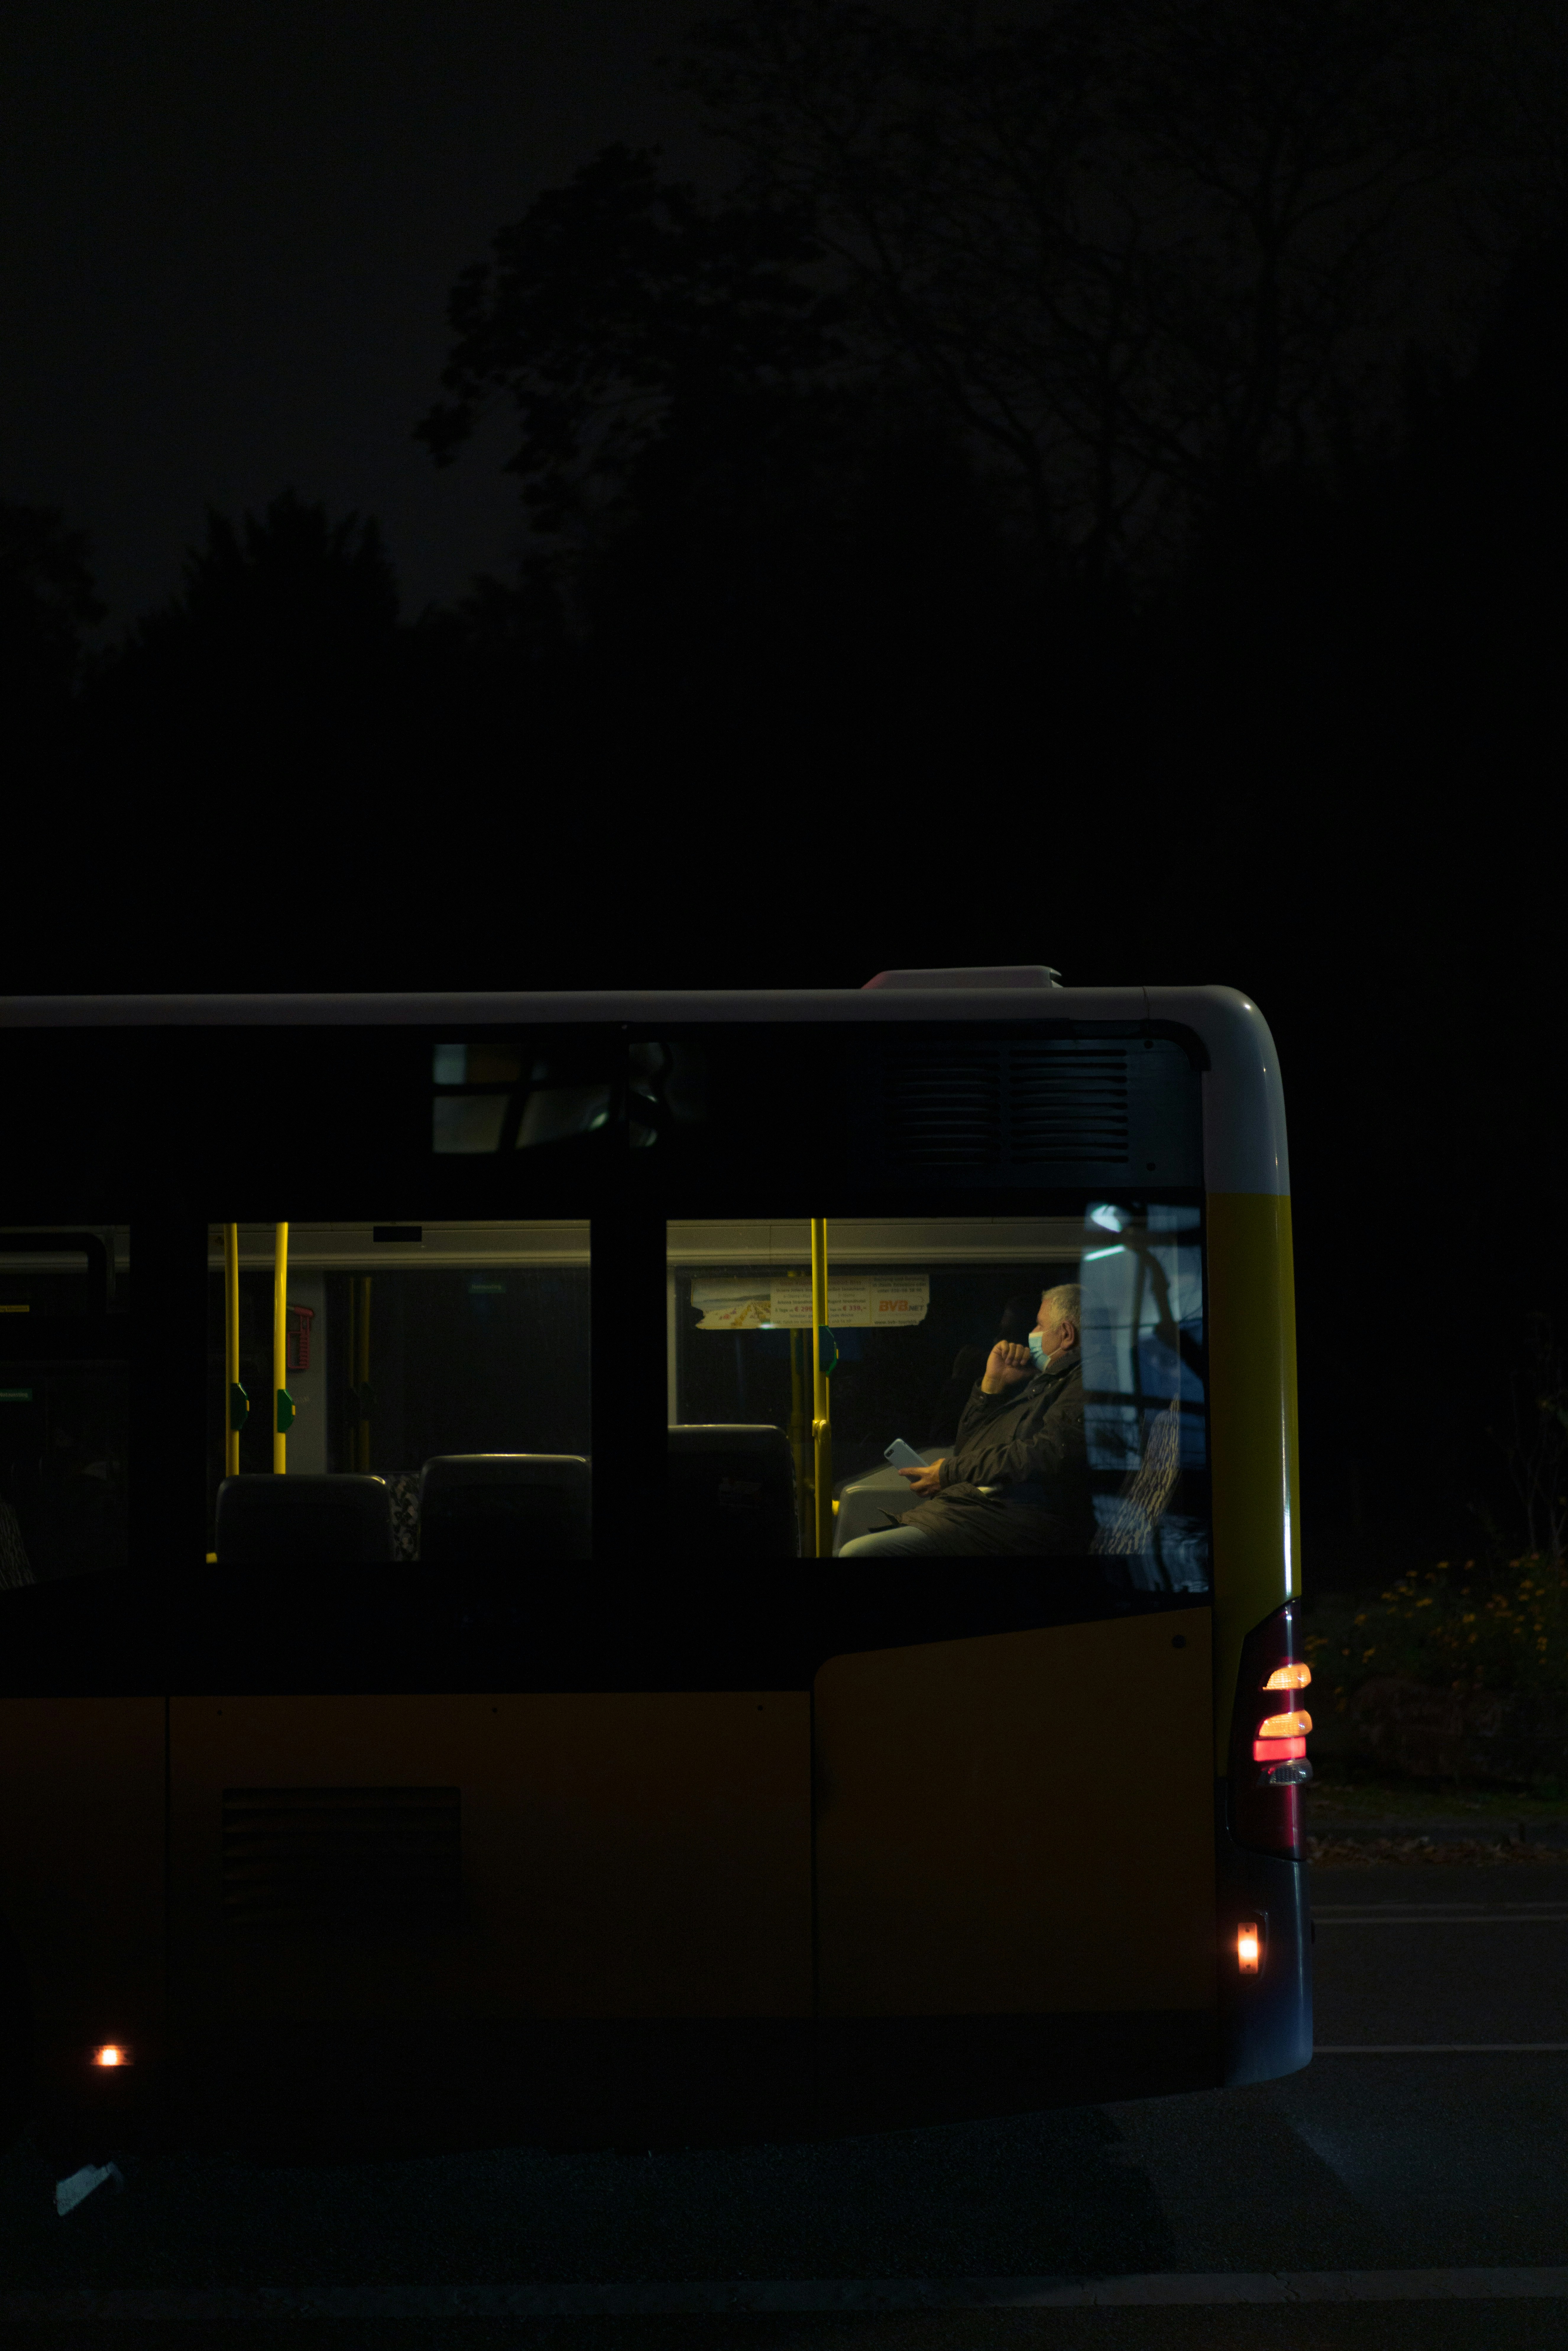 white-and-blue-bus-on-road-during-night-time